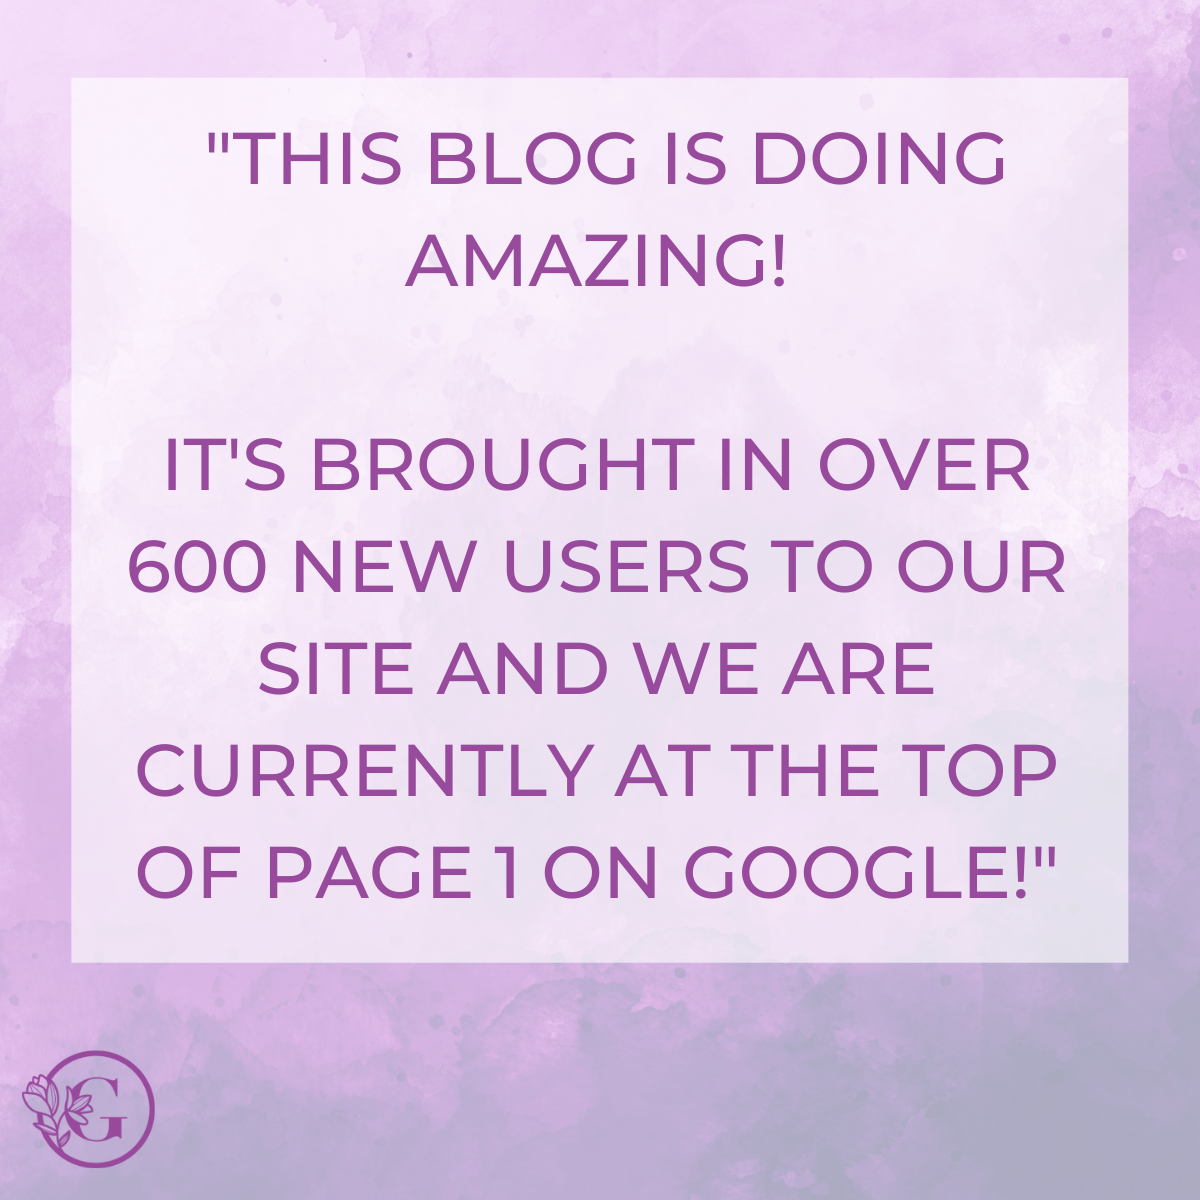 Testimonial for Amy Dawson's SEO content writing services. Words saying "this blog is doing amazing. It's brought over 600 new users to our site and we currently sit at the top of page 1 on Google"